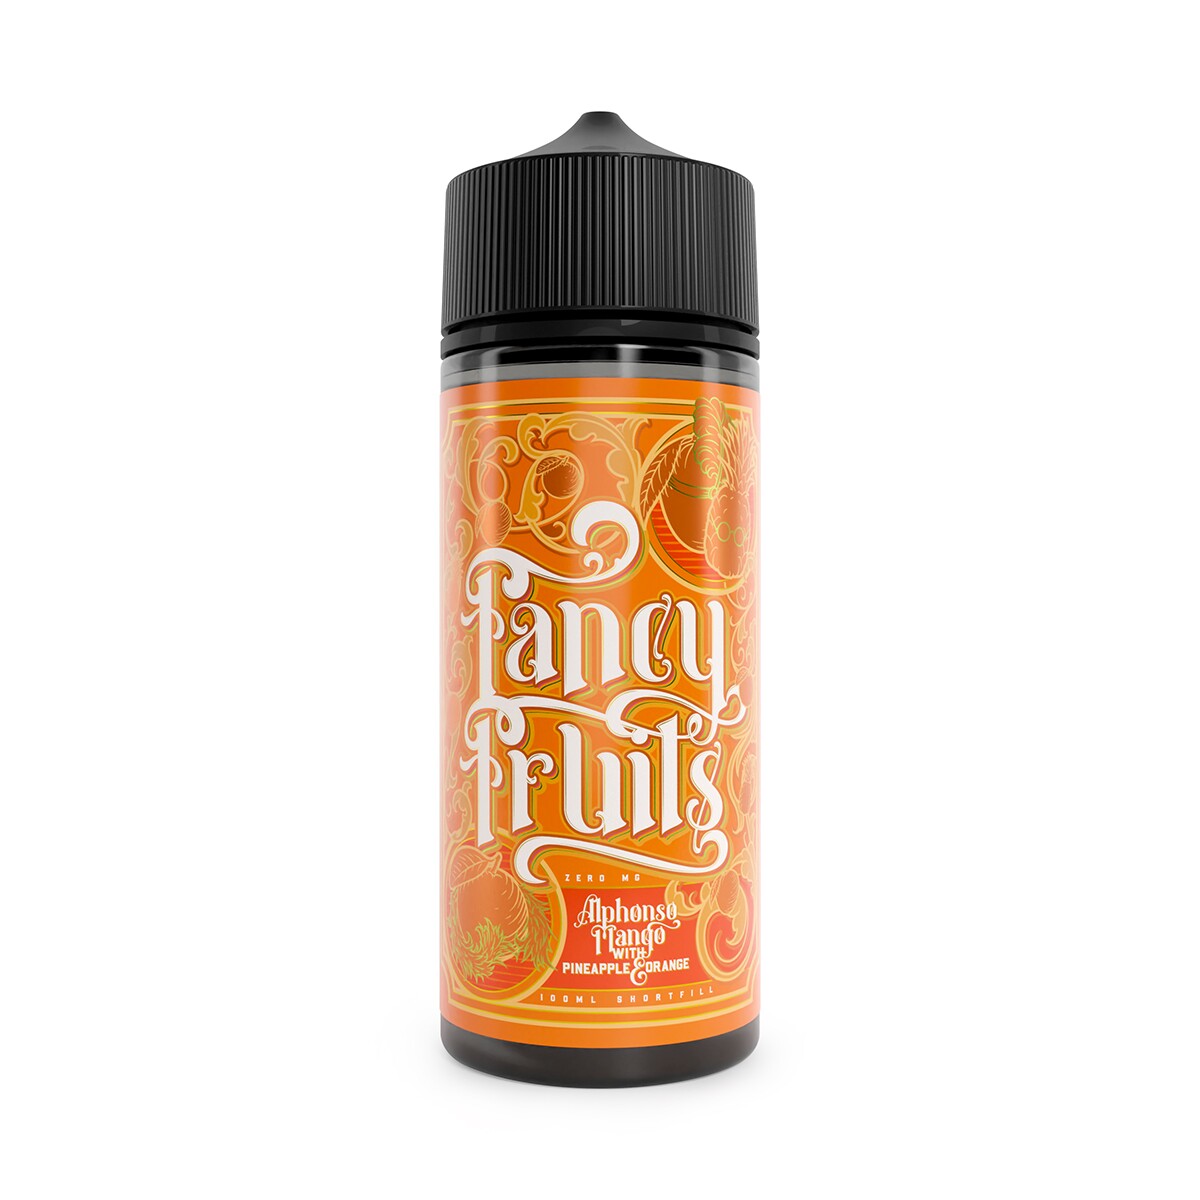 Fancy fruits alphonso mango with pineapple and orange 100ml shortfill, this range combines unique & delicious fruits together to create the fanciest e-liquid on the market